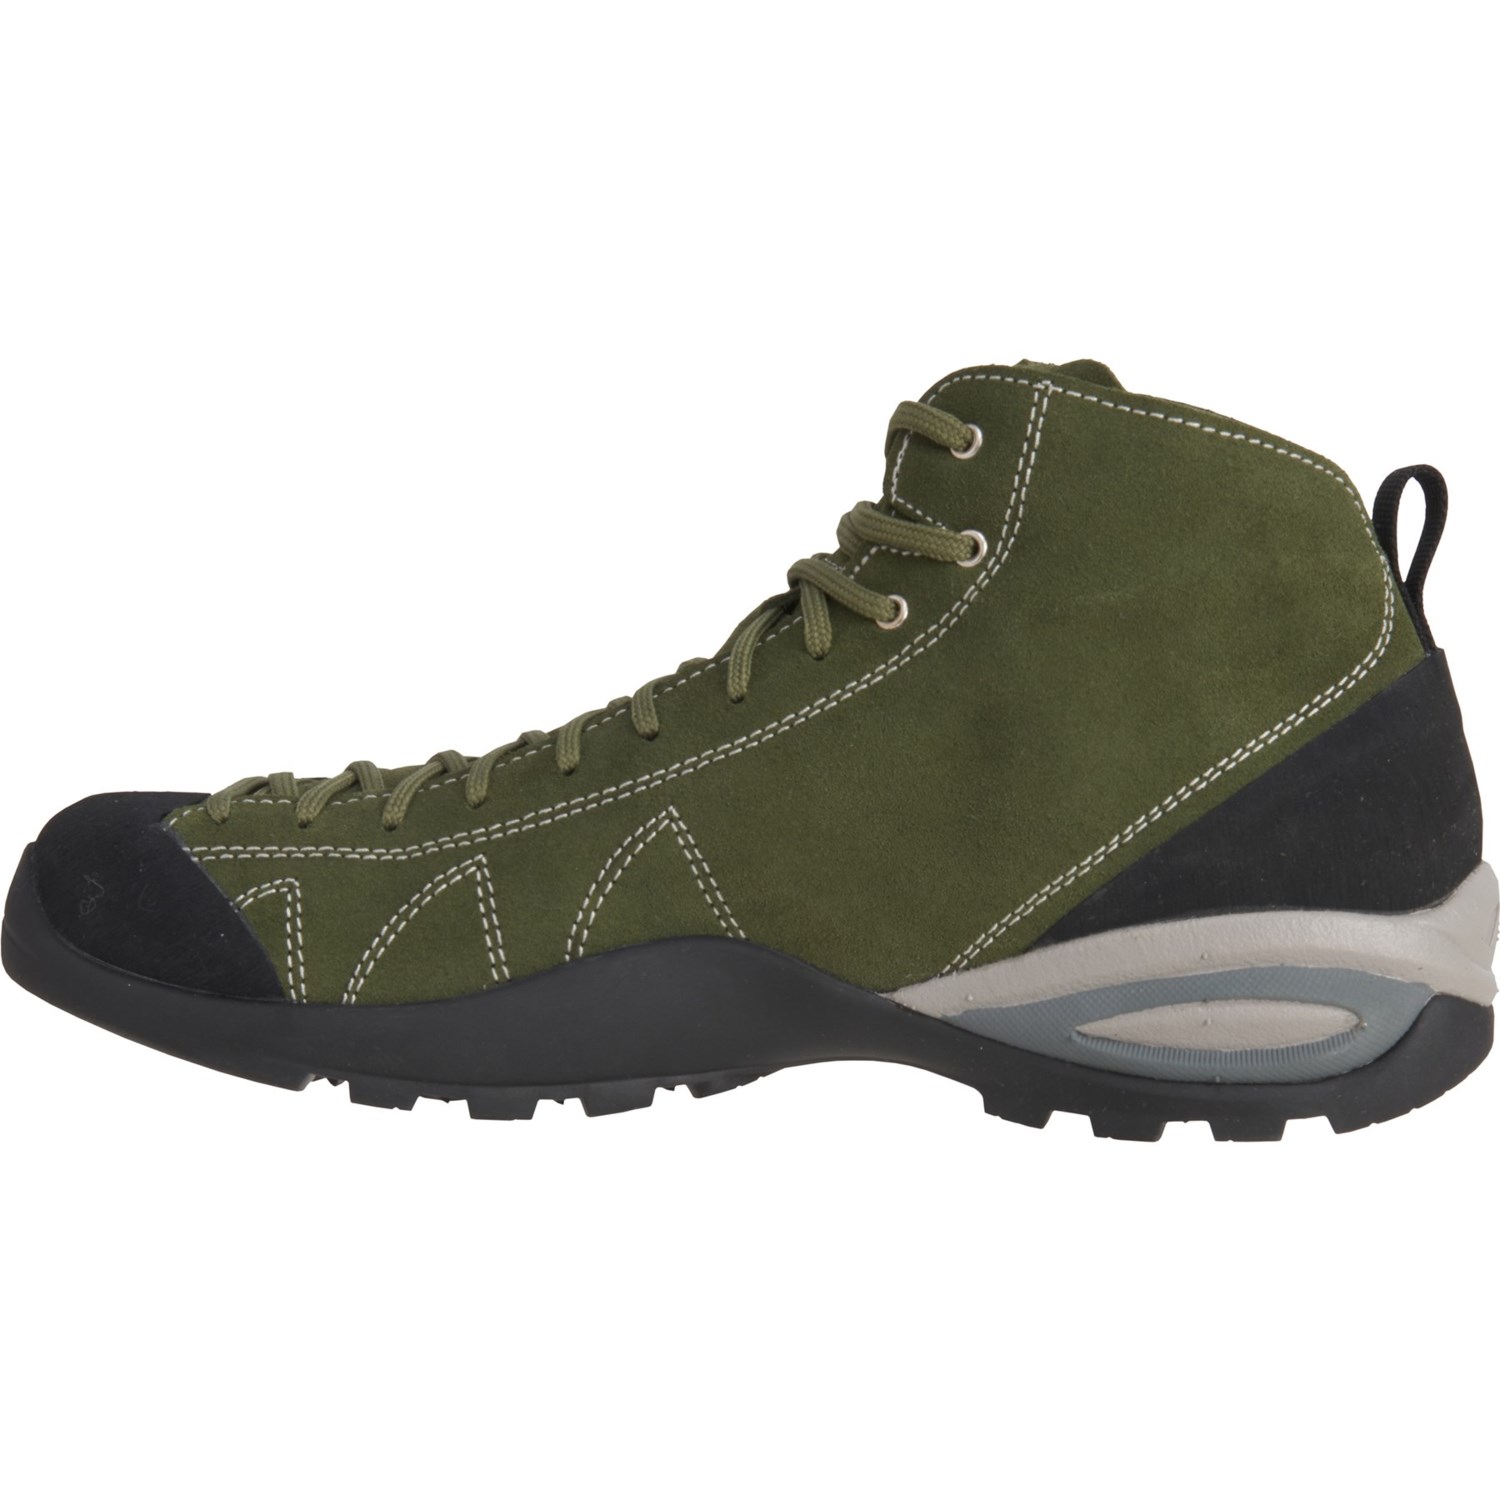 Asolo Cactus GV Gore-Tex® Hiking Boots (For Men) - Save 40%